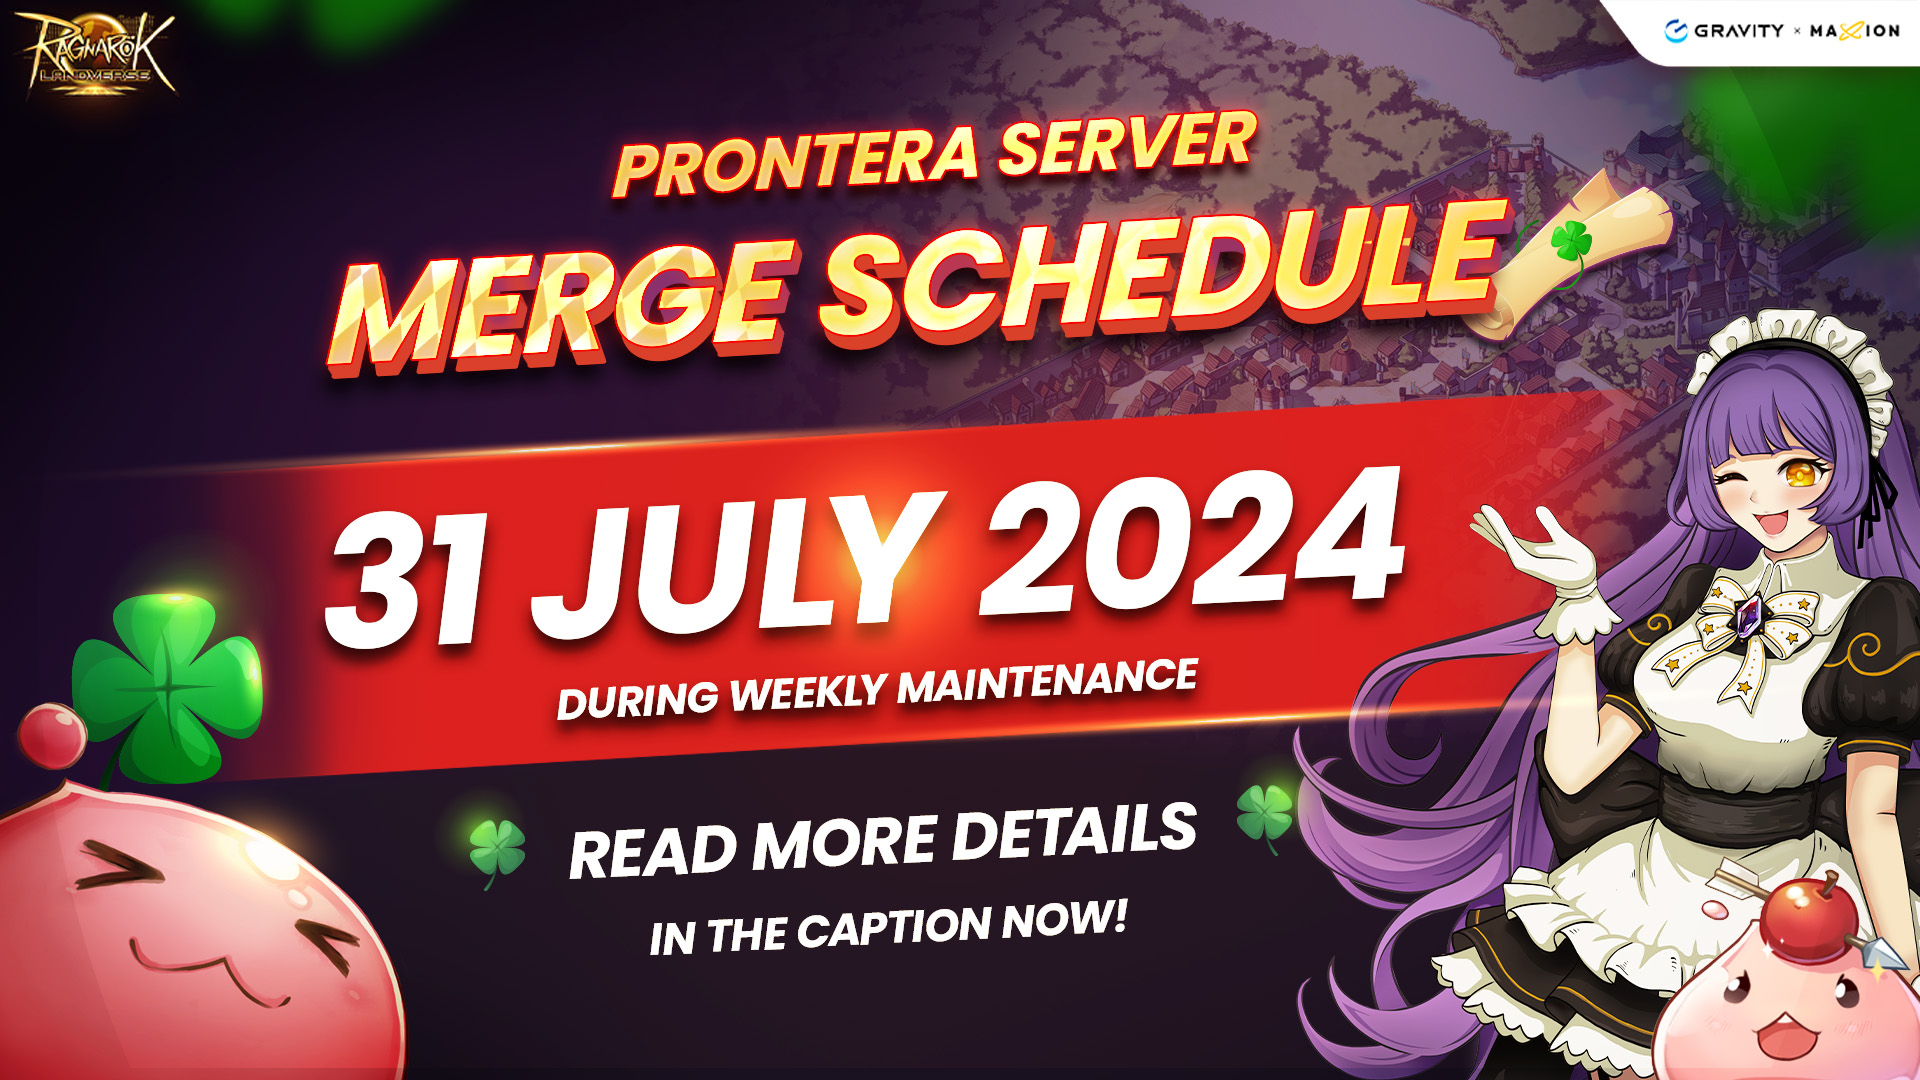 📢 Important Announcement: The Seasonal Server Prontera Merge is Coming!